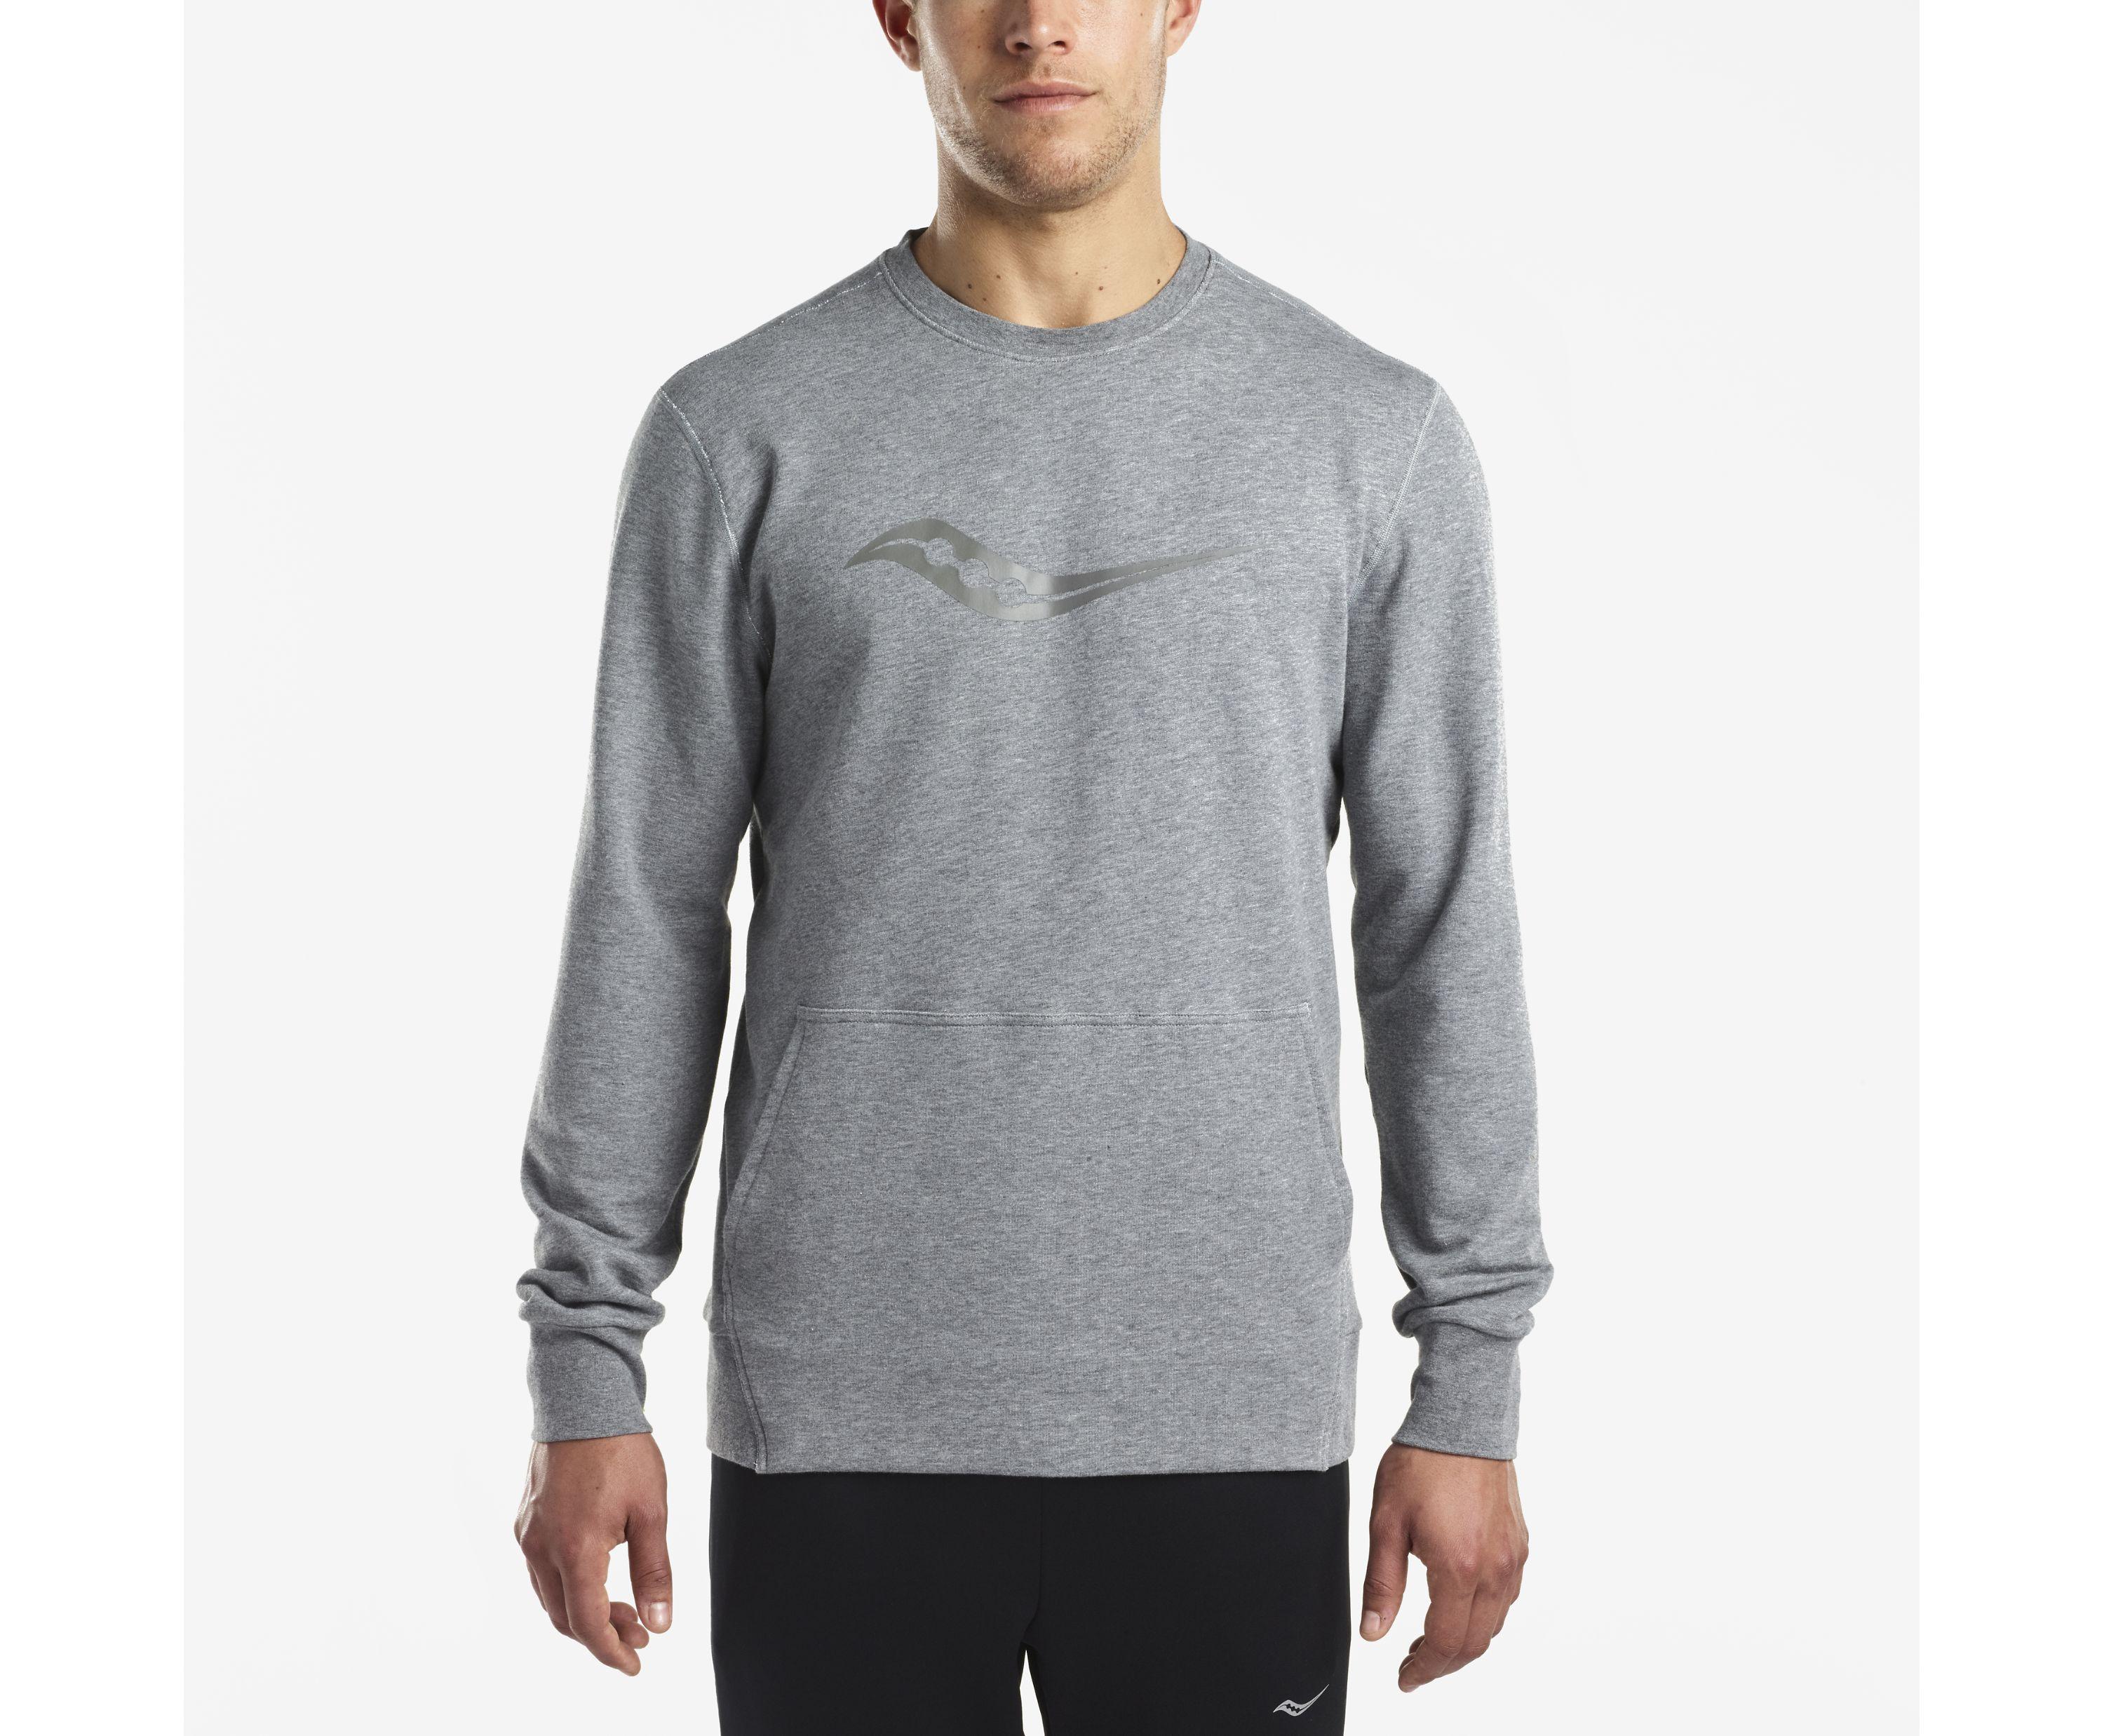 Saucony Mens Life On The Run Cooldown Long Sleeve Top Grey Sports Running Gym